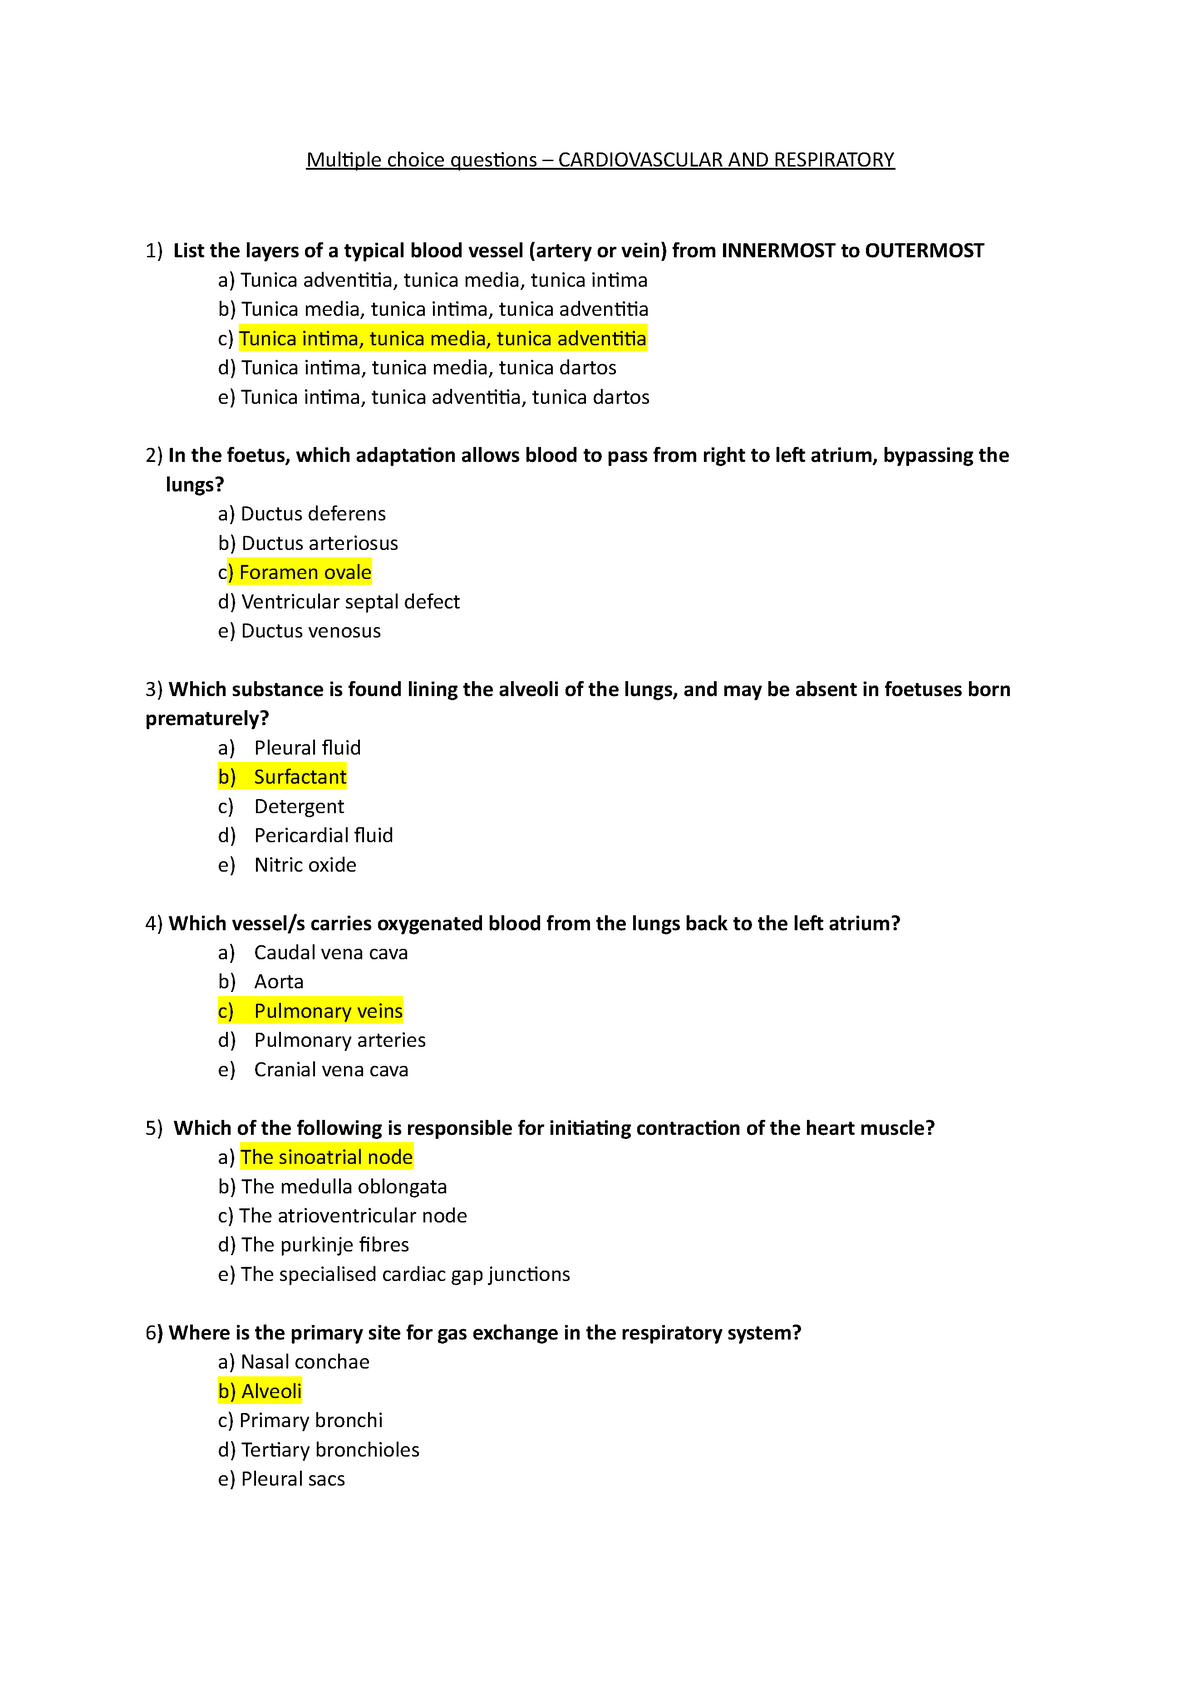 research proposal multiple choice questions and answers